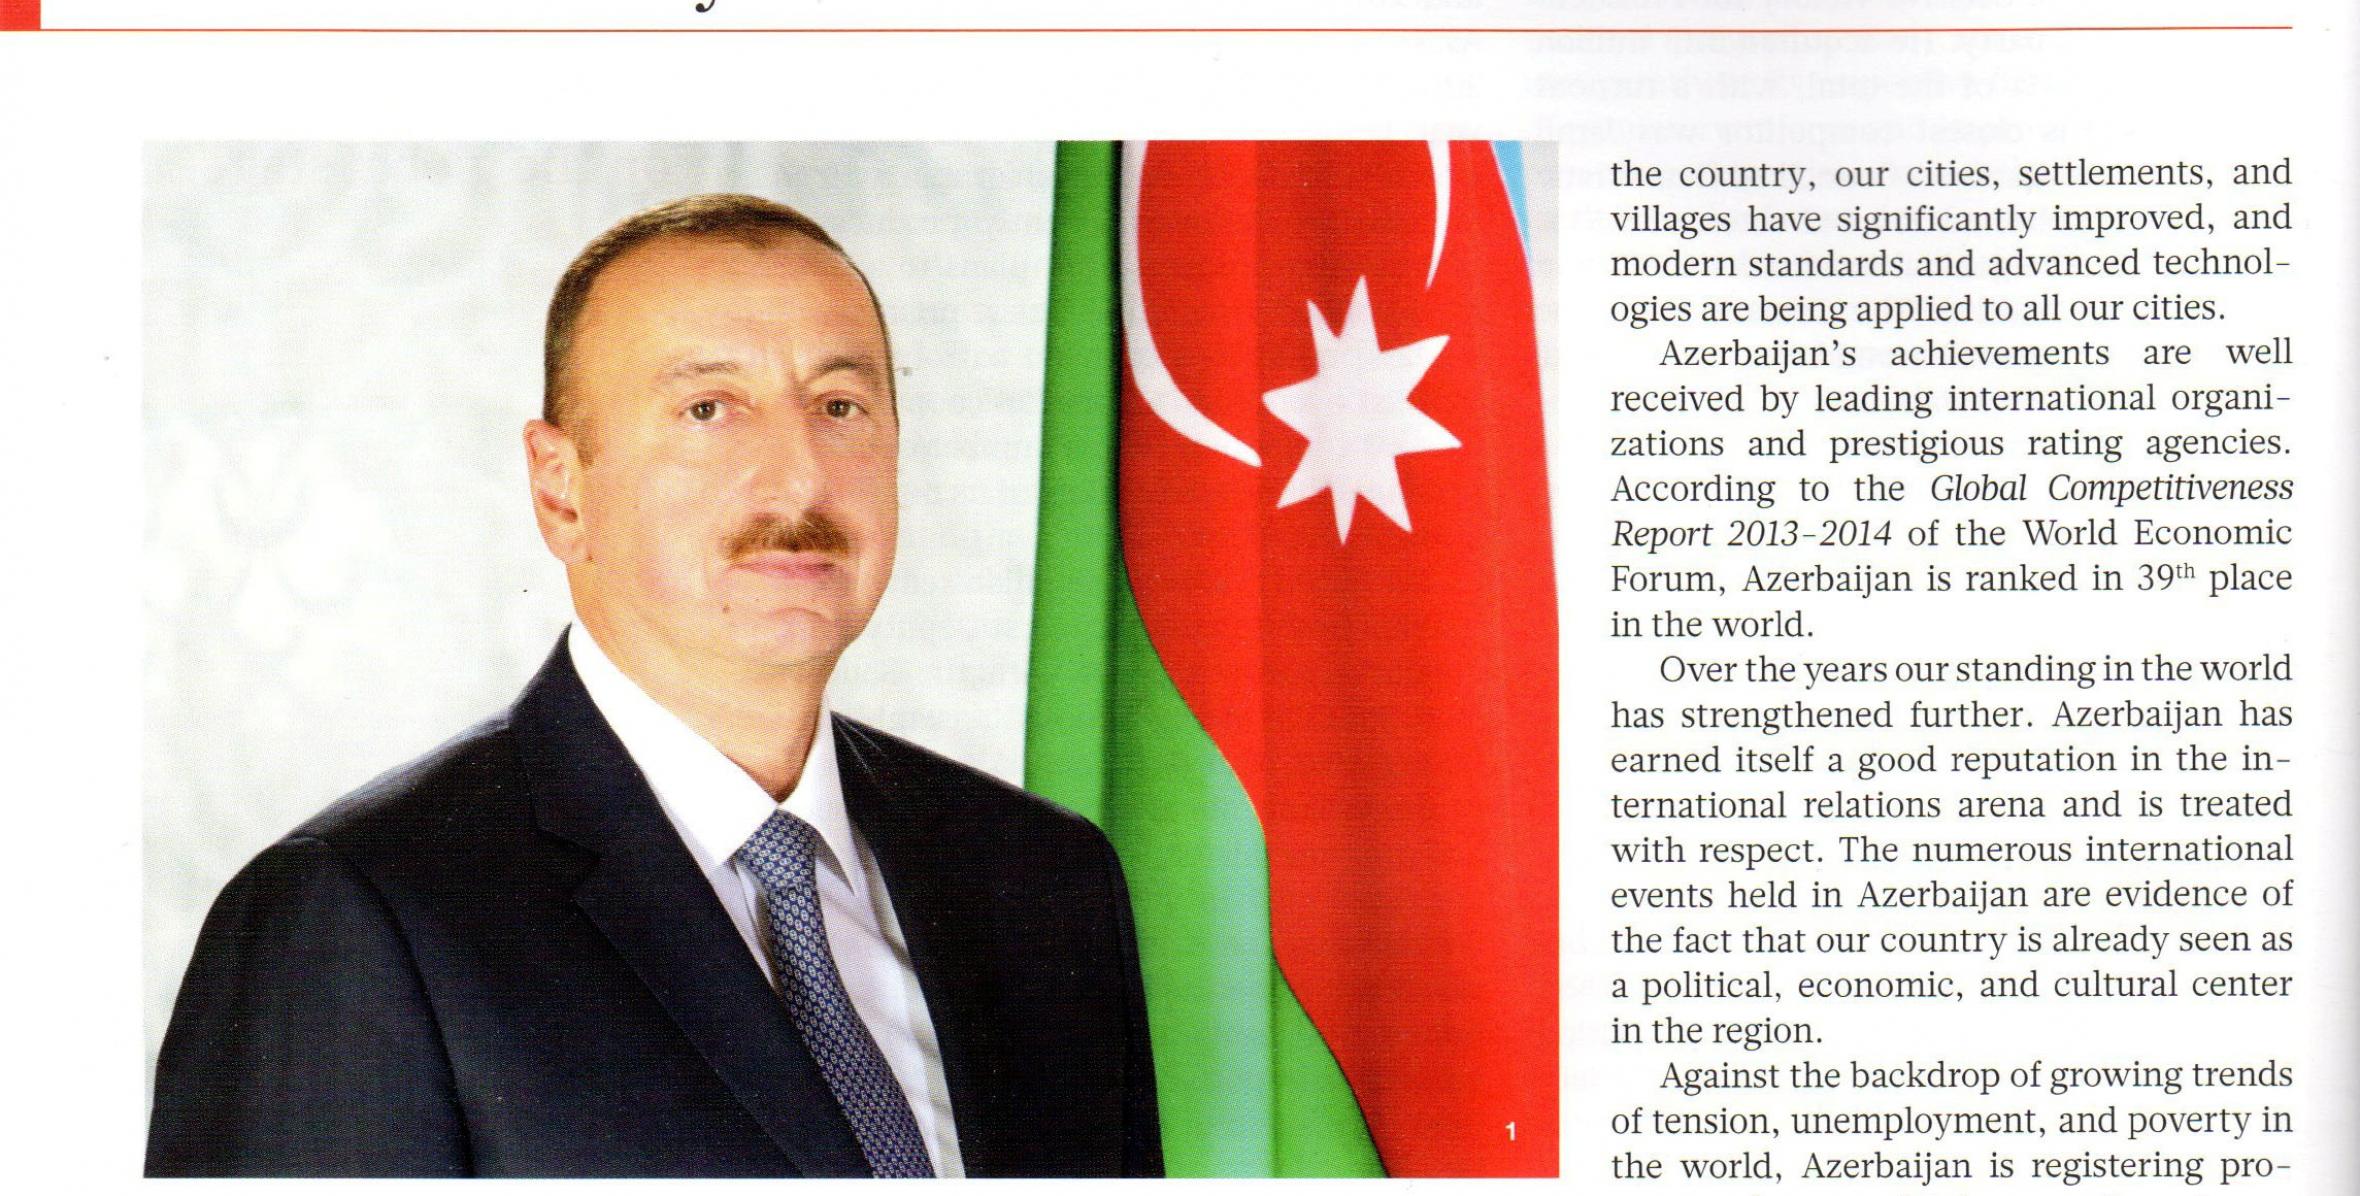 Ilham Aliyev has been interviewed by “The Business Year” magazine